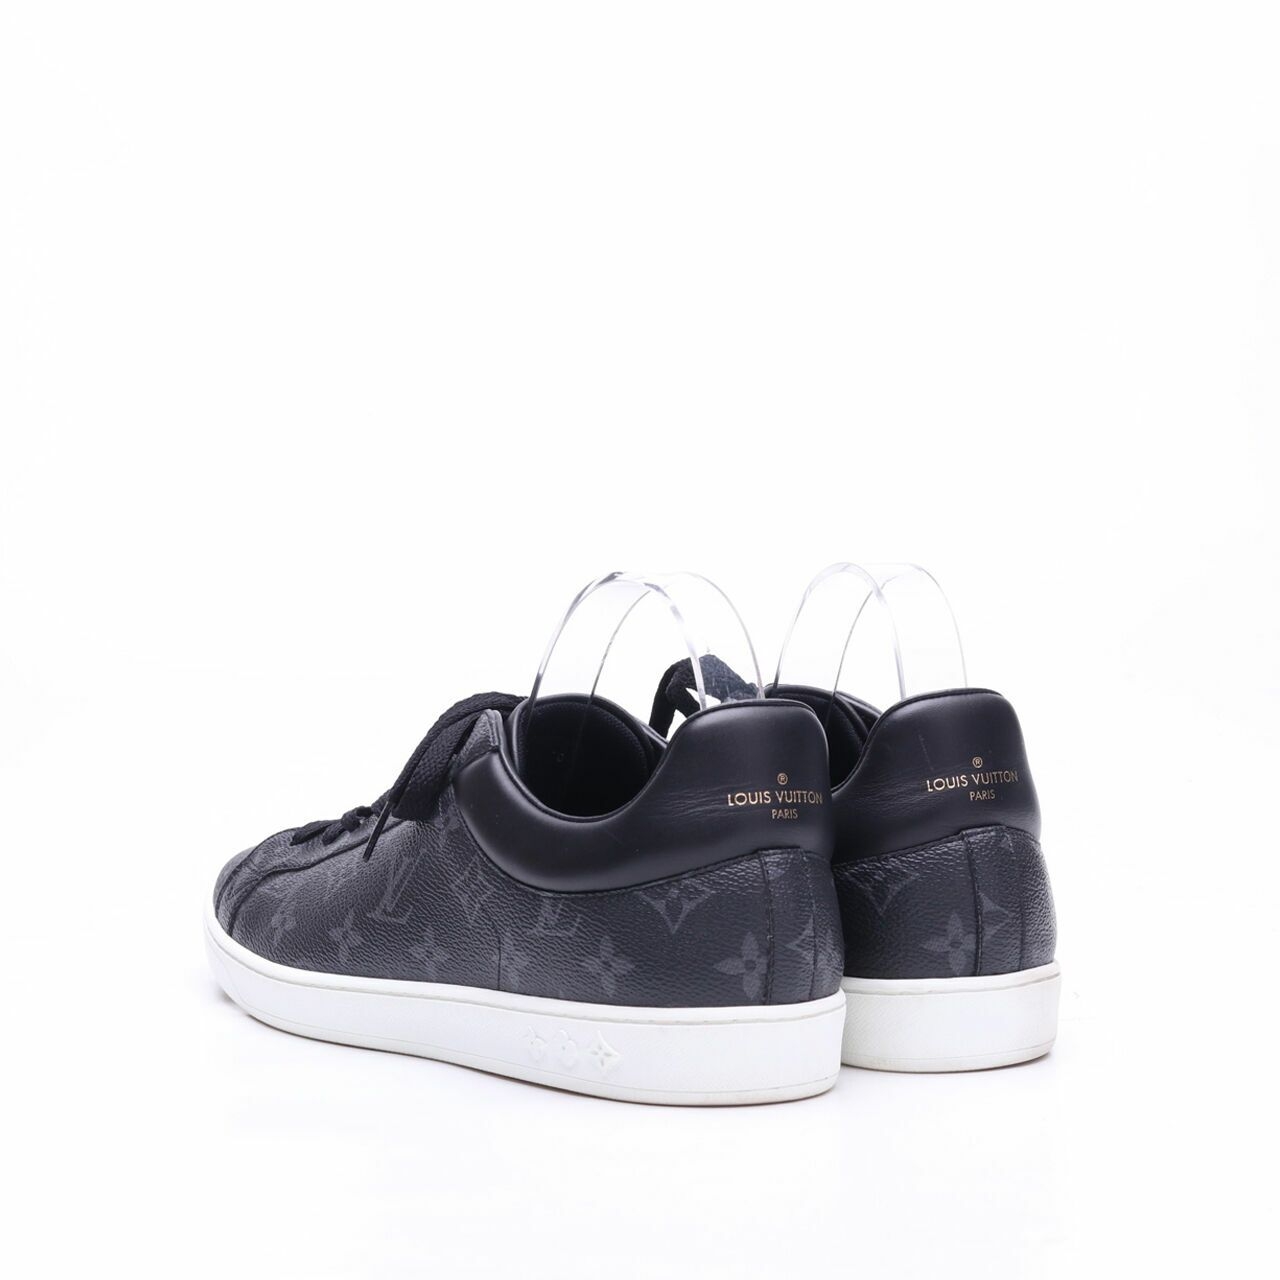 Louis Vuitton Luxembourg Black Sneakers